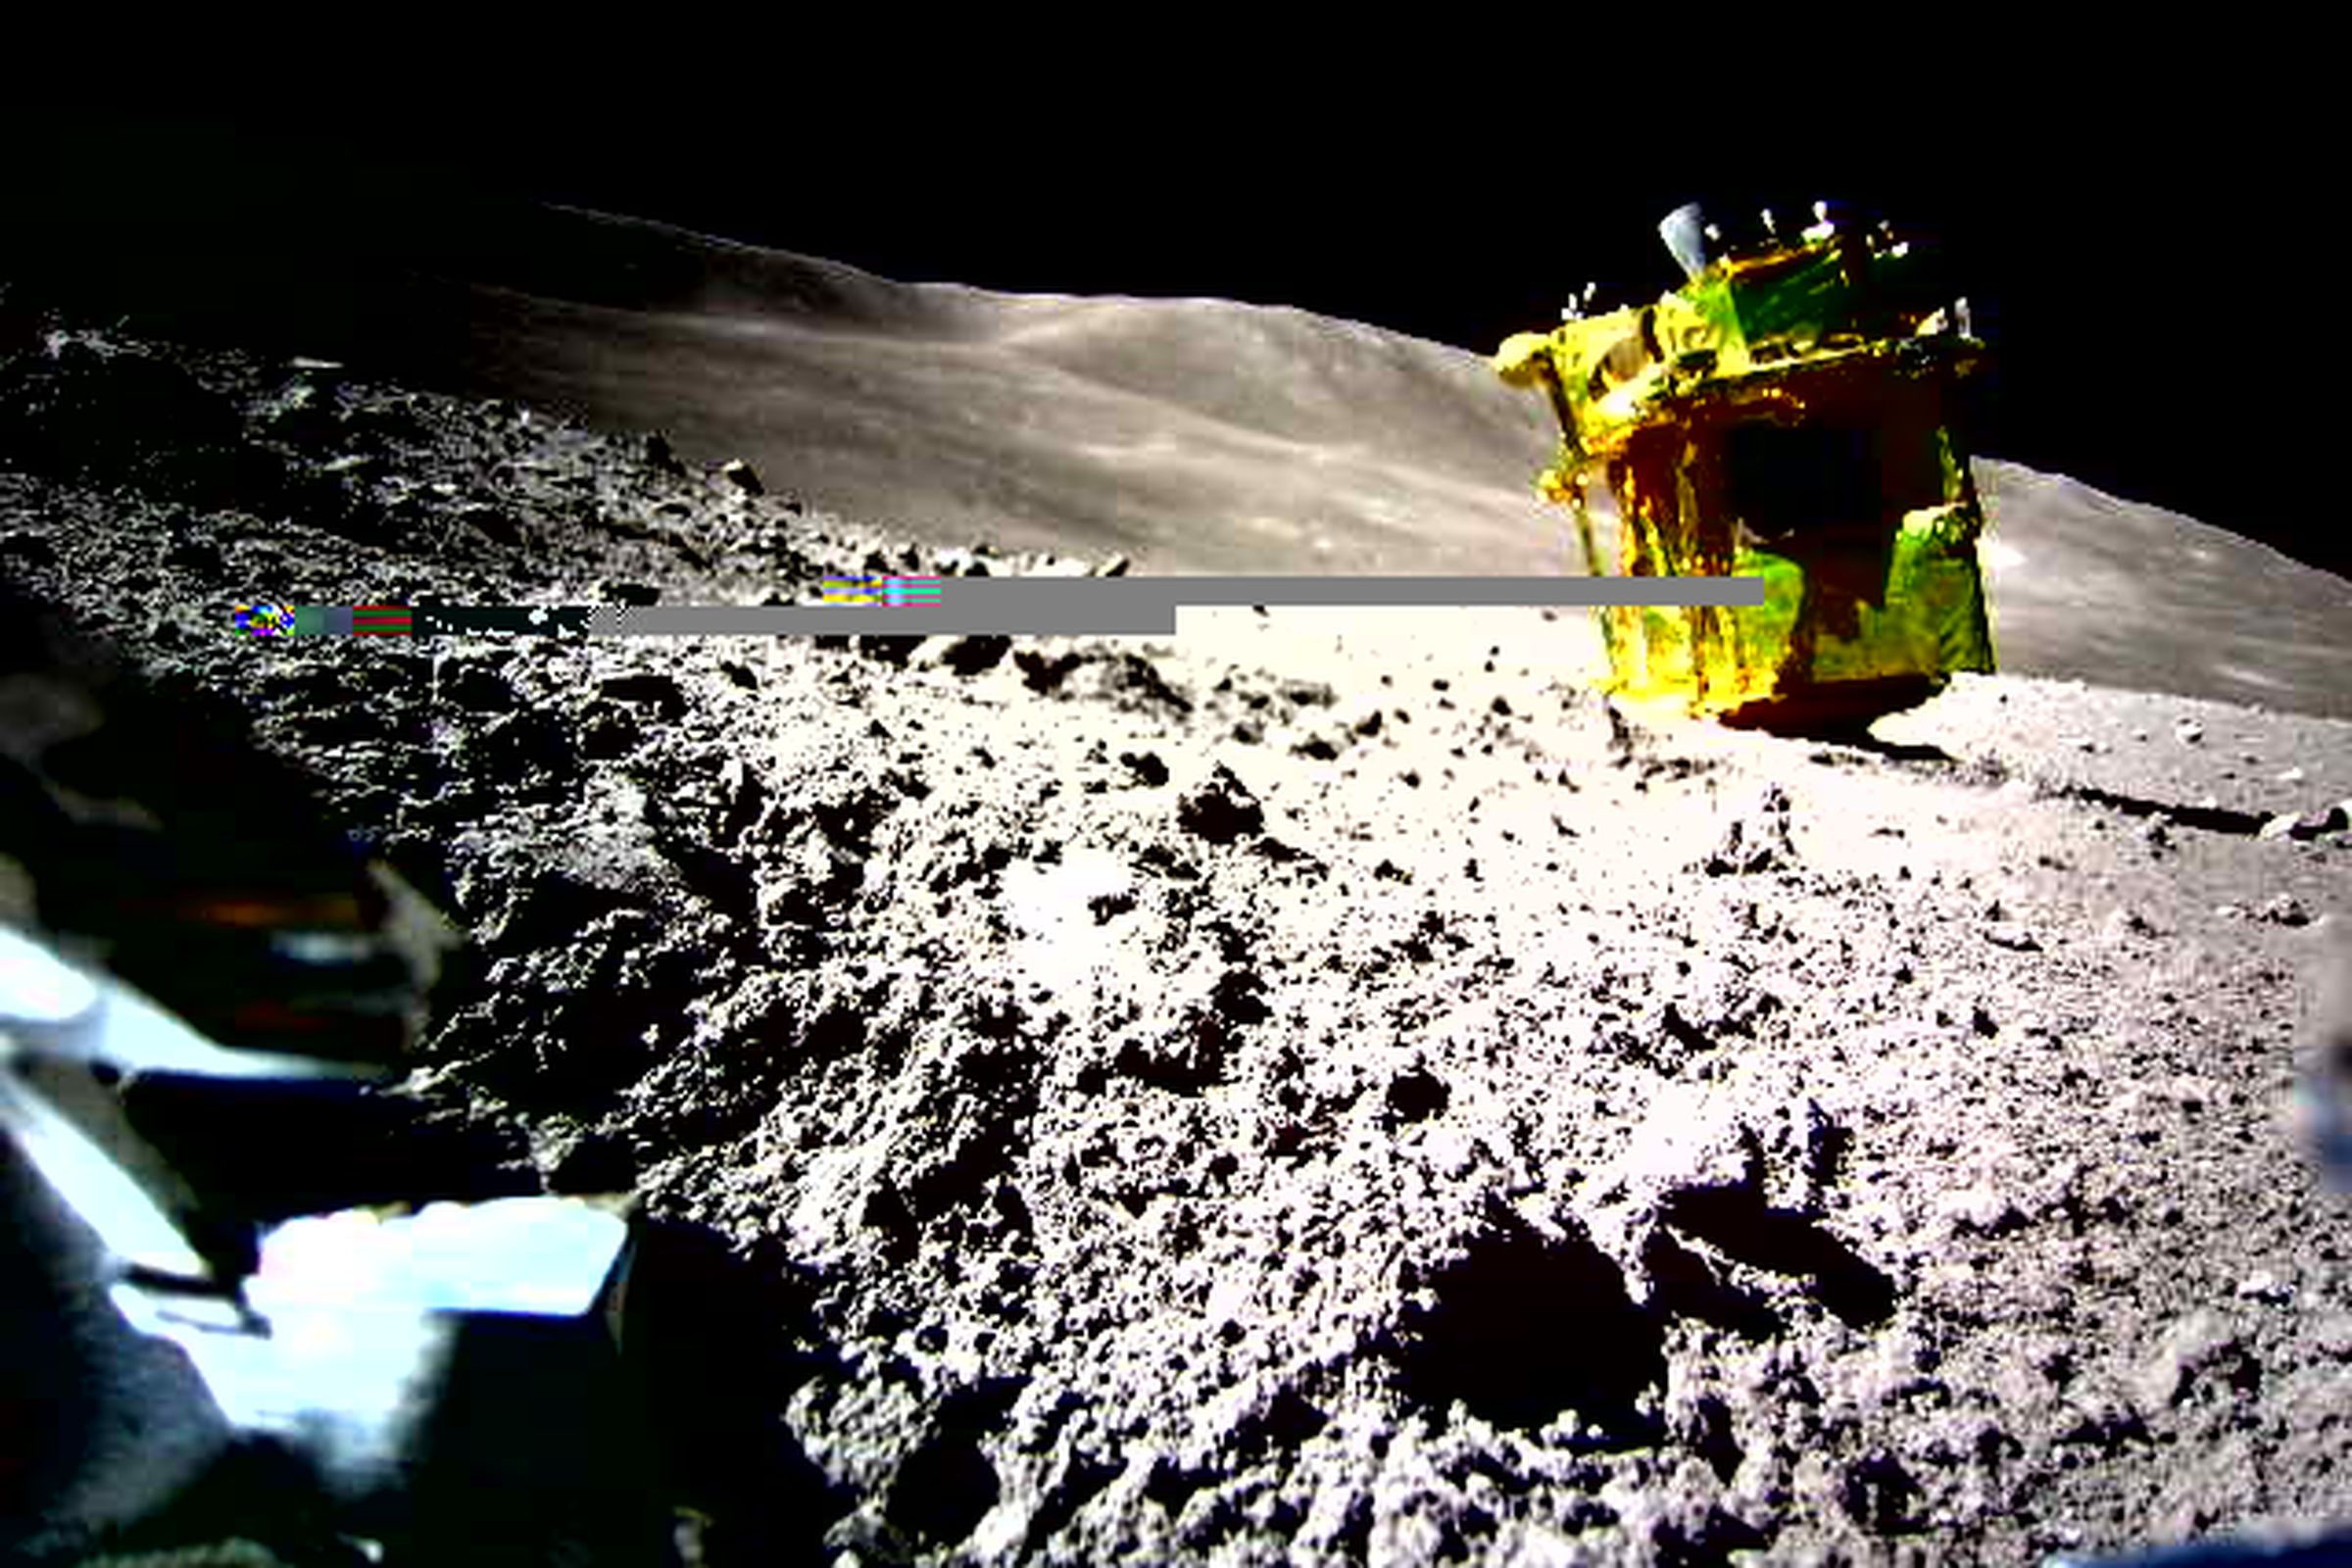 A photograph taken of the SLIM probe on the Moon’s surface by the LEV-2 robot.